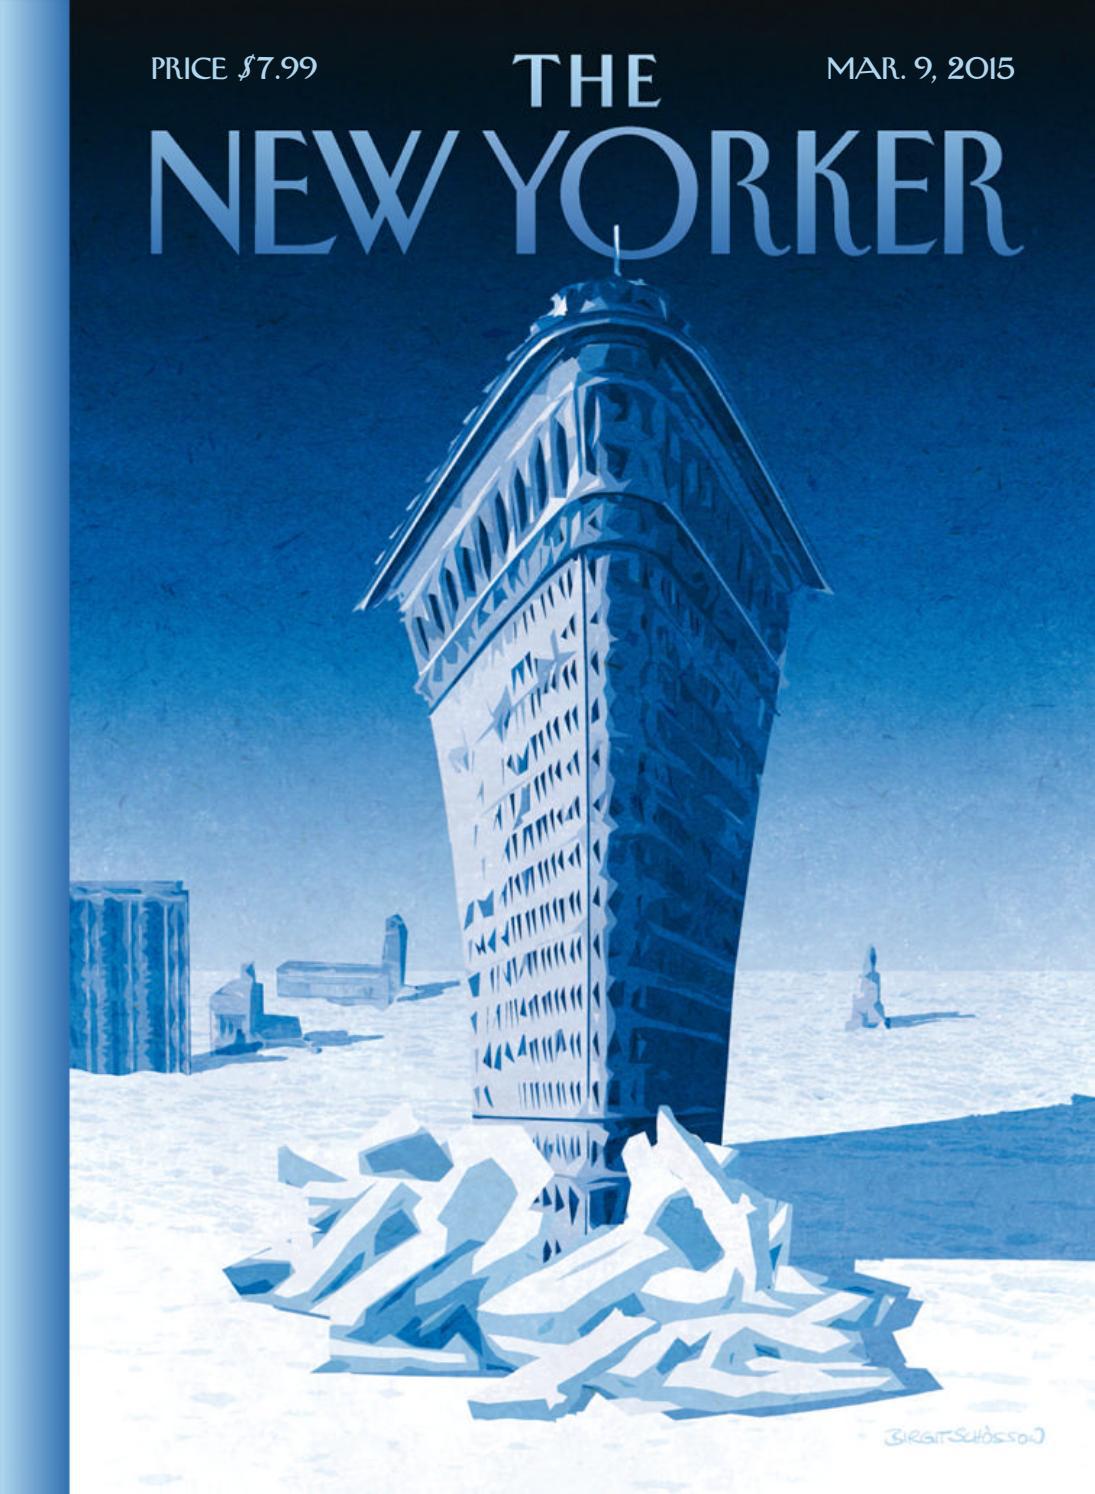 The New Yorker - March 9, 2015